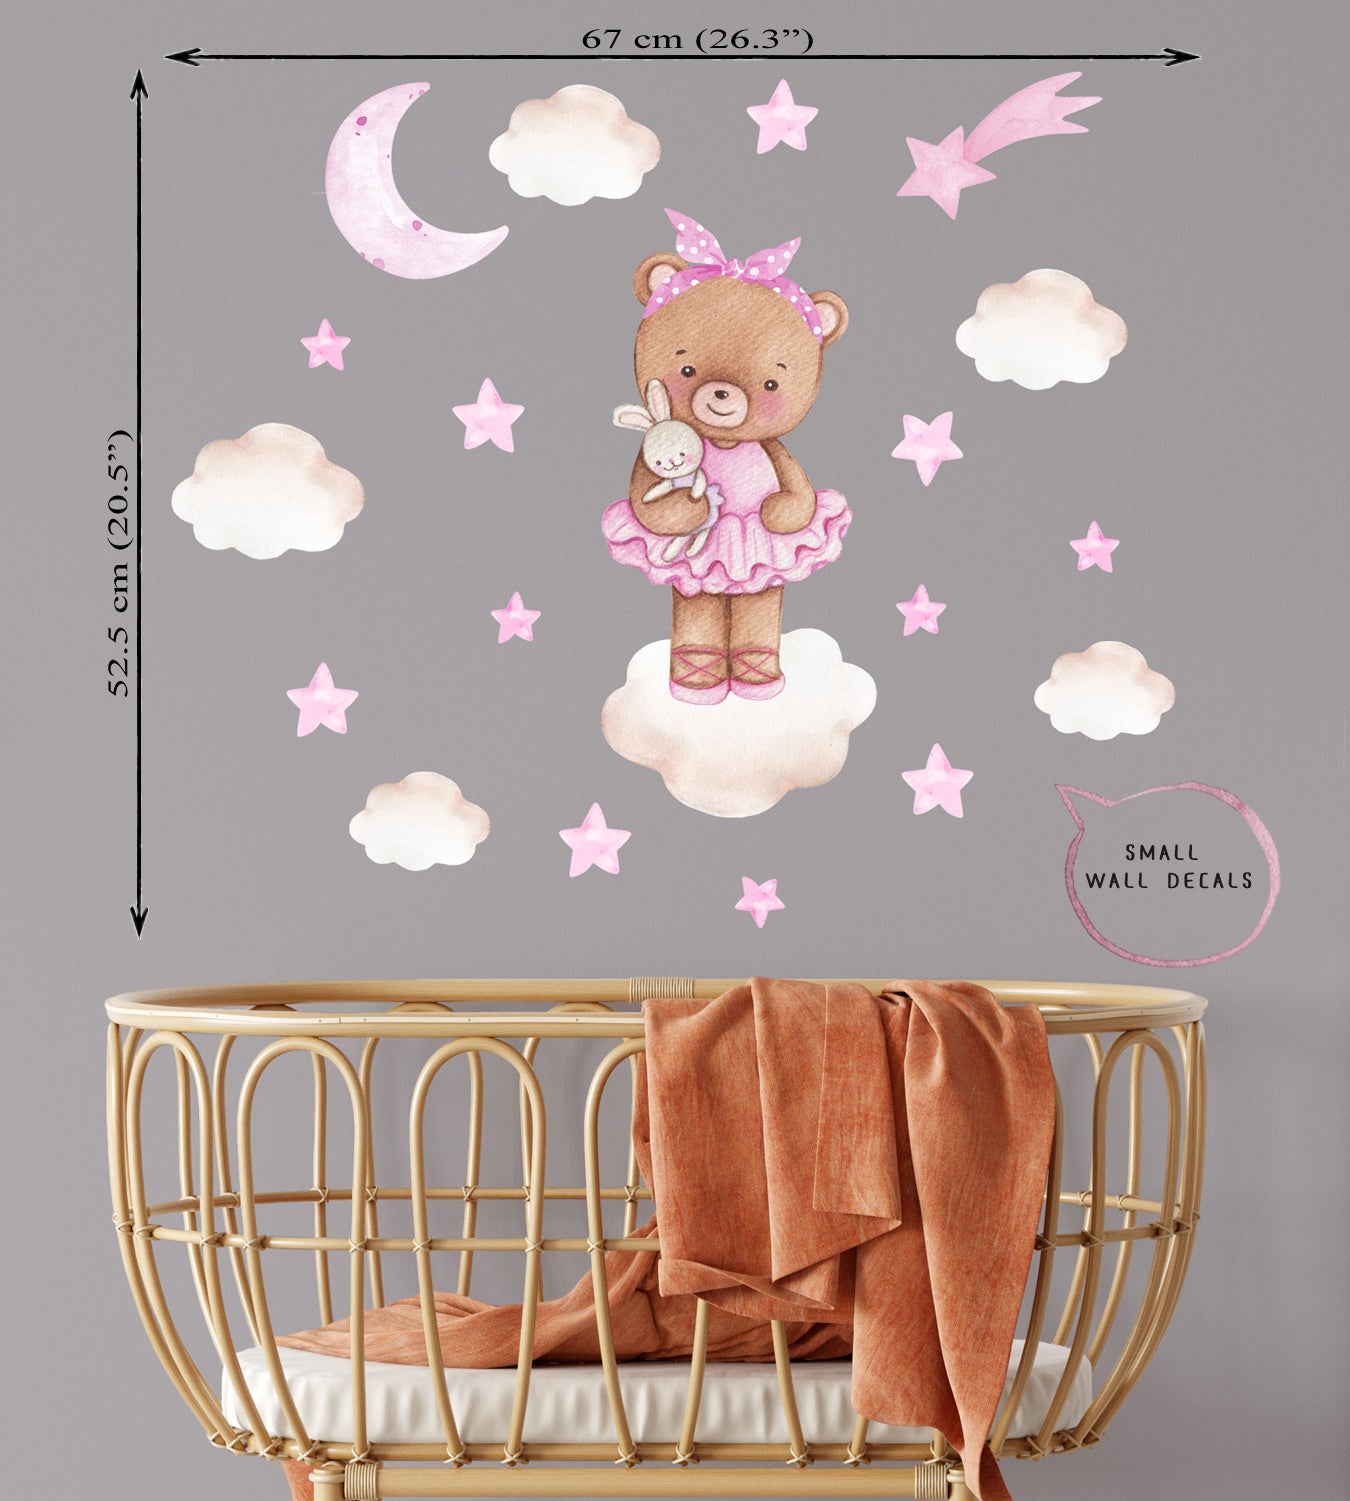 Teddy bear ballerina - small wall decals for baby room. Cloud, stars and comet.